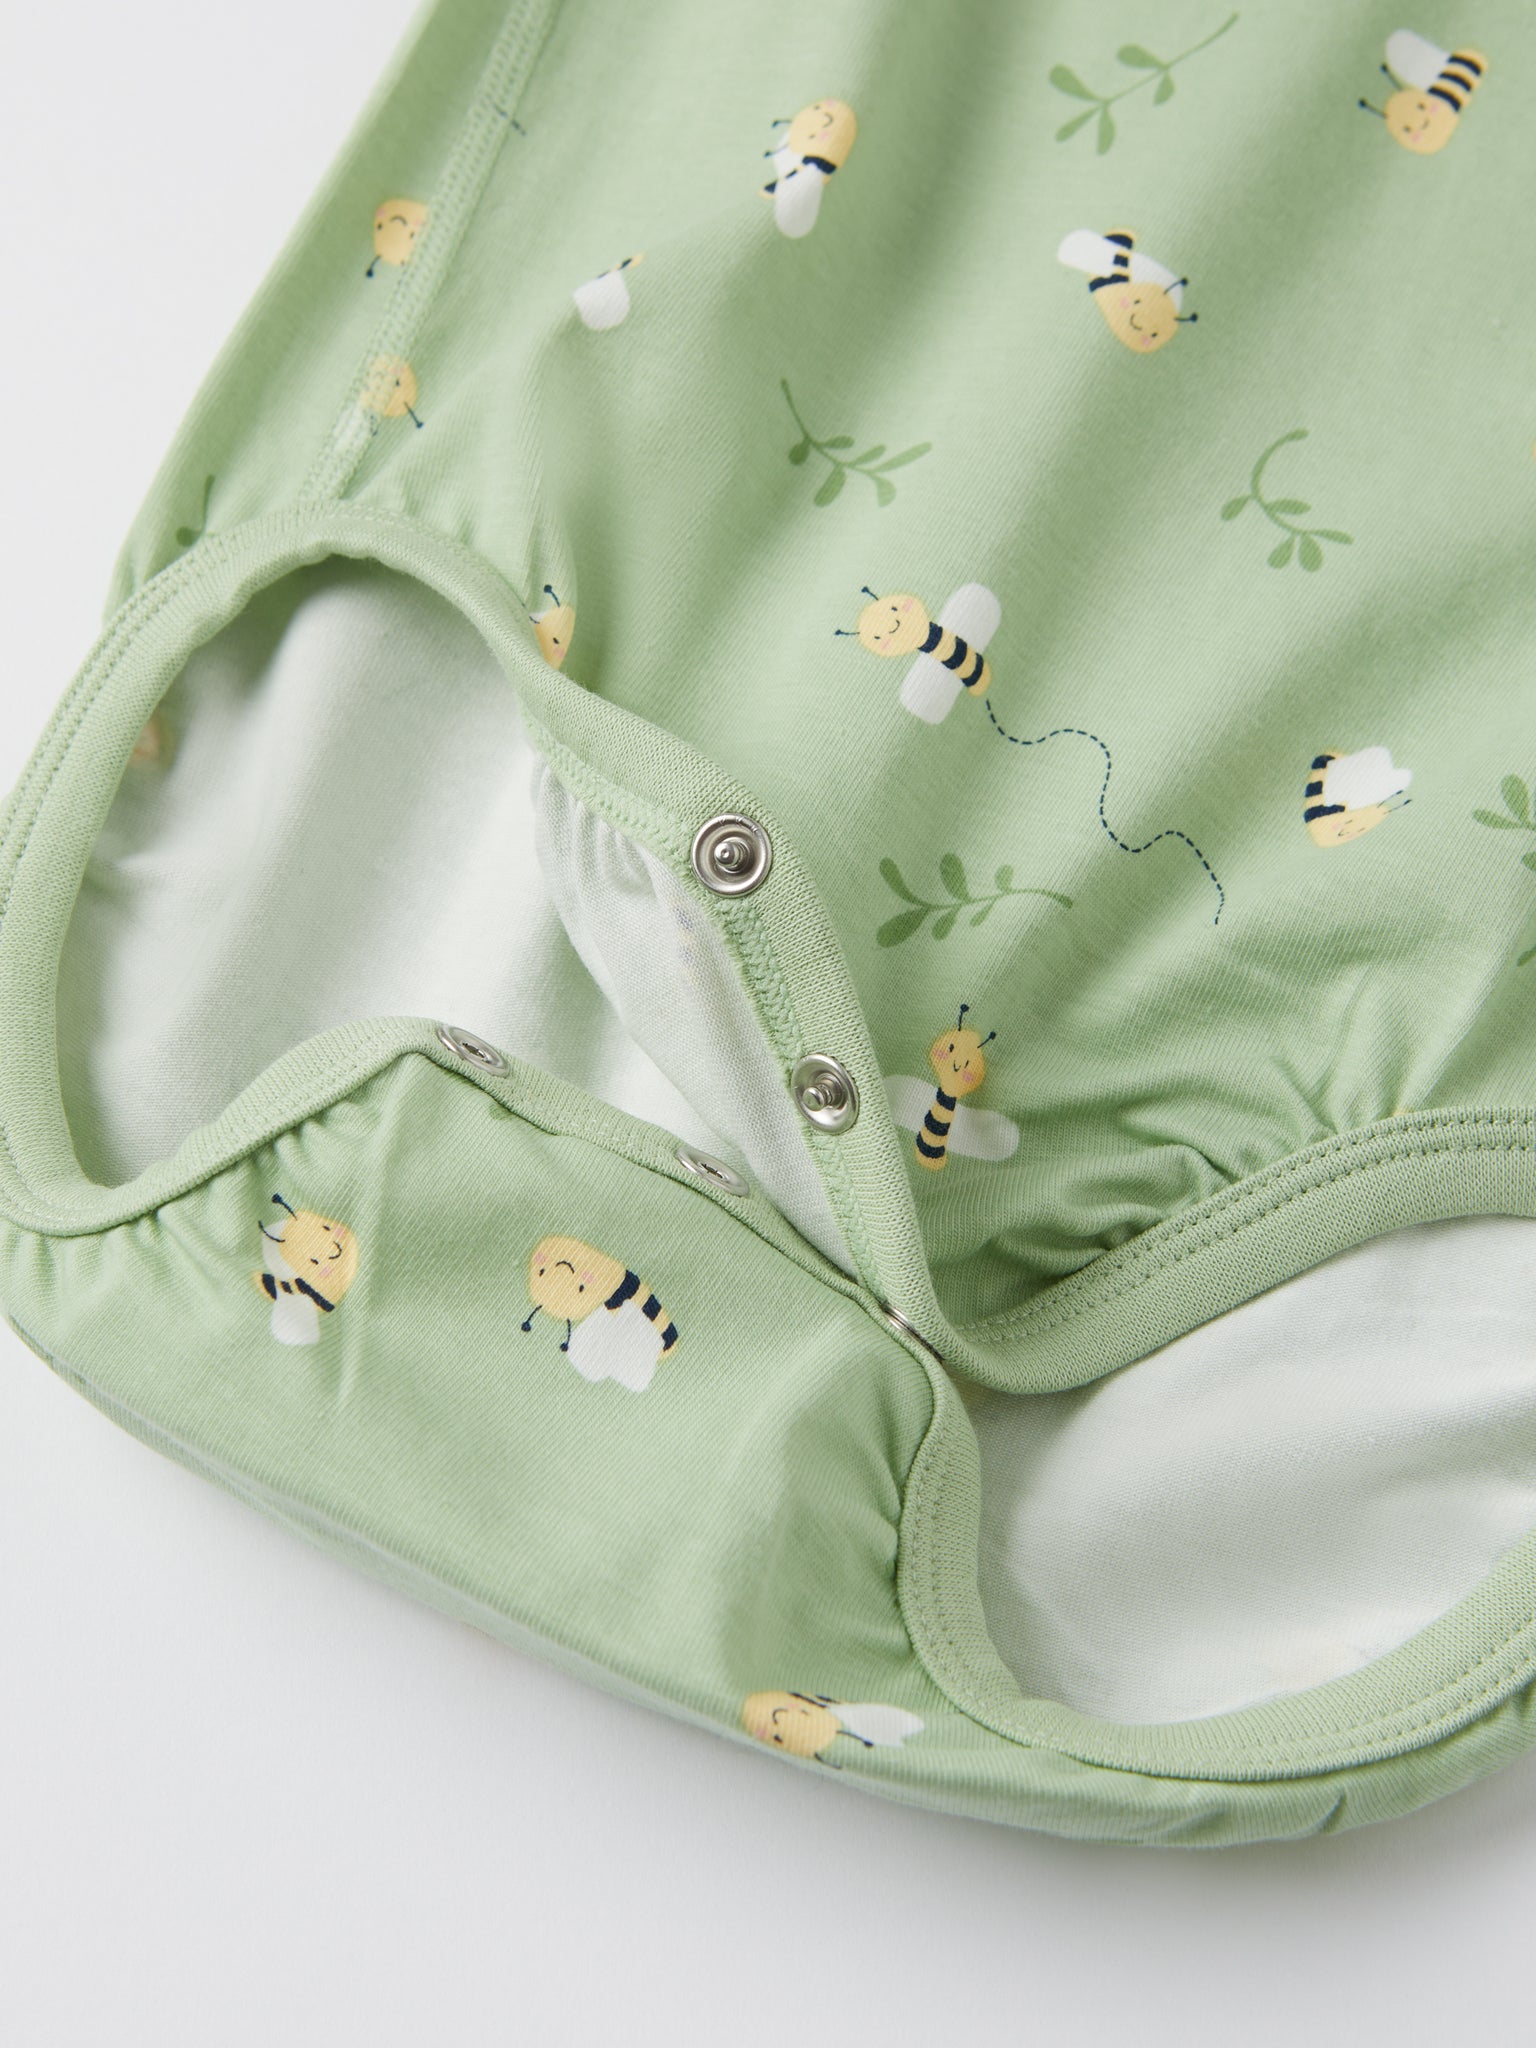 Bee Print Babygrow from the Polarn O. Pyret baby collection. Clothes made using sustainably sourced materials.